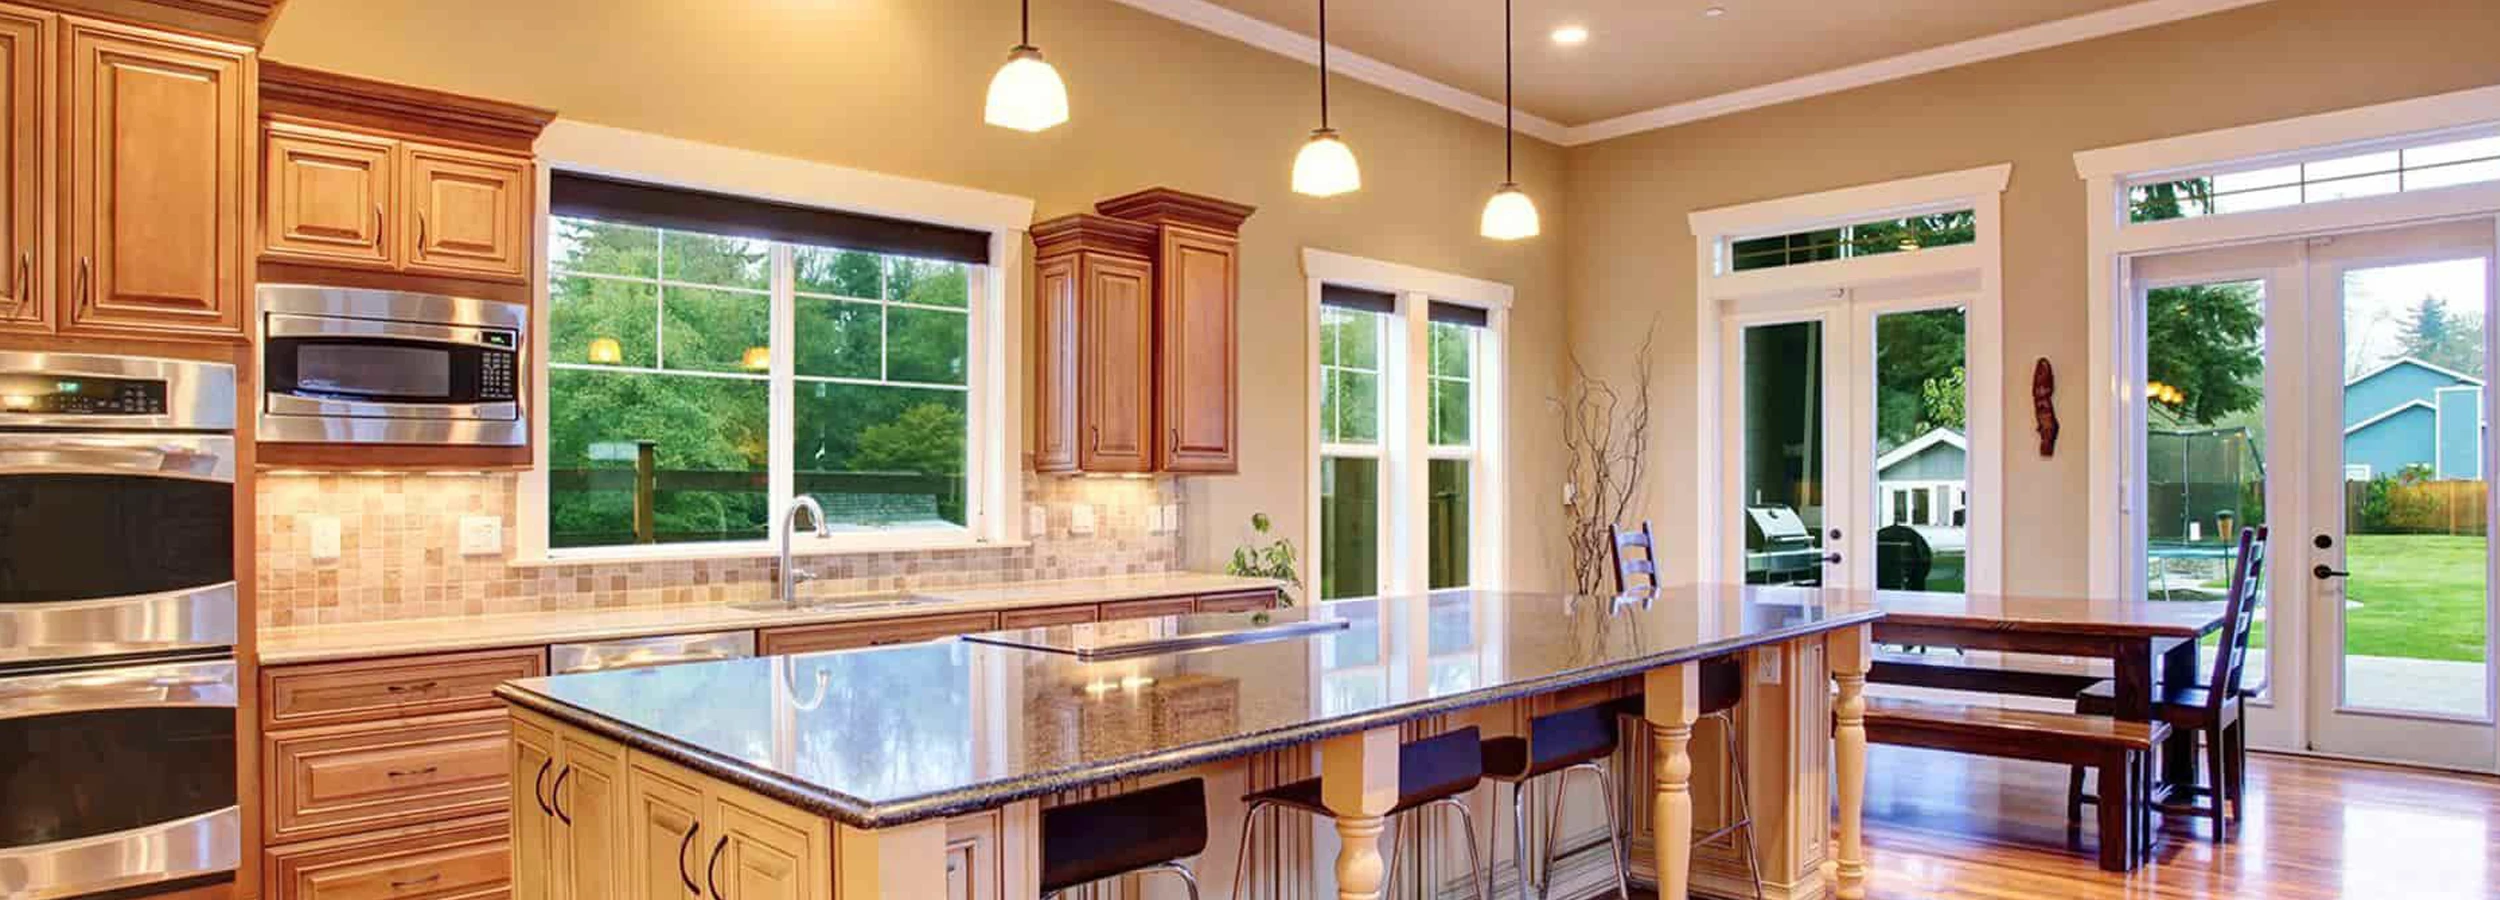 Traditional kitchen with granite counters on a large island, natural wood cabinets and tan walls.